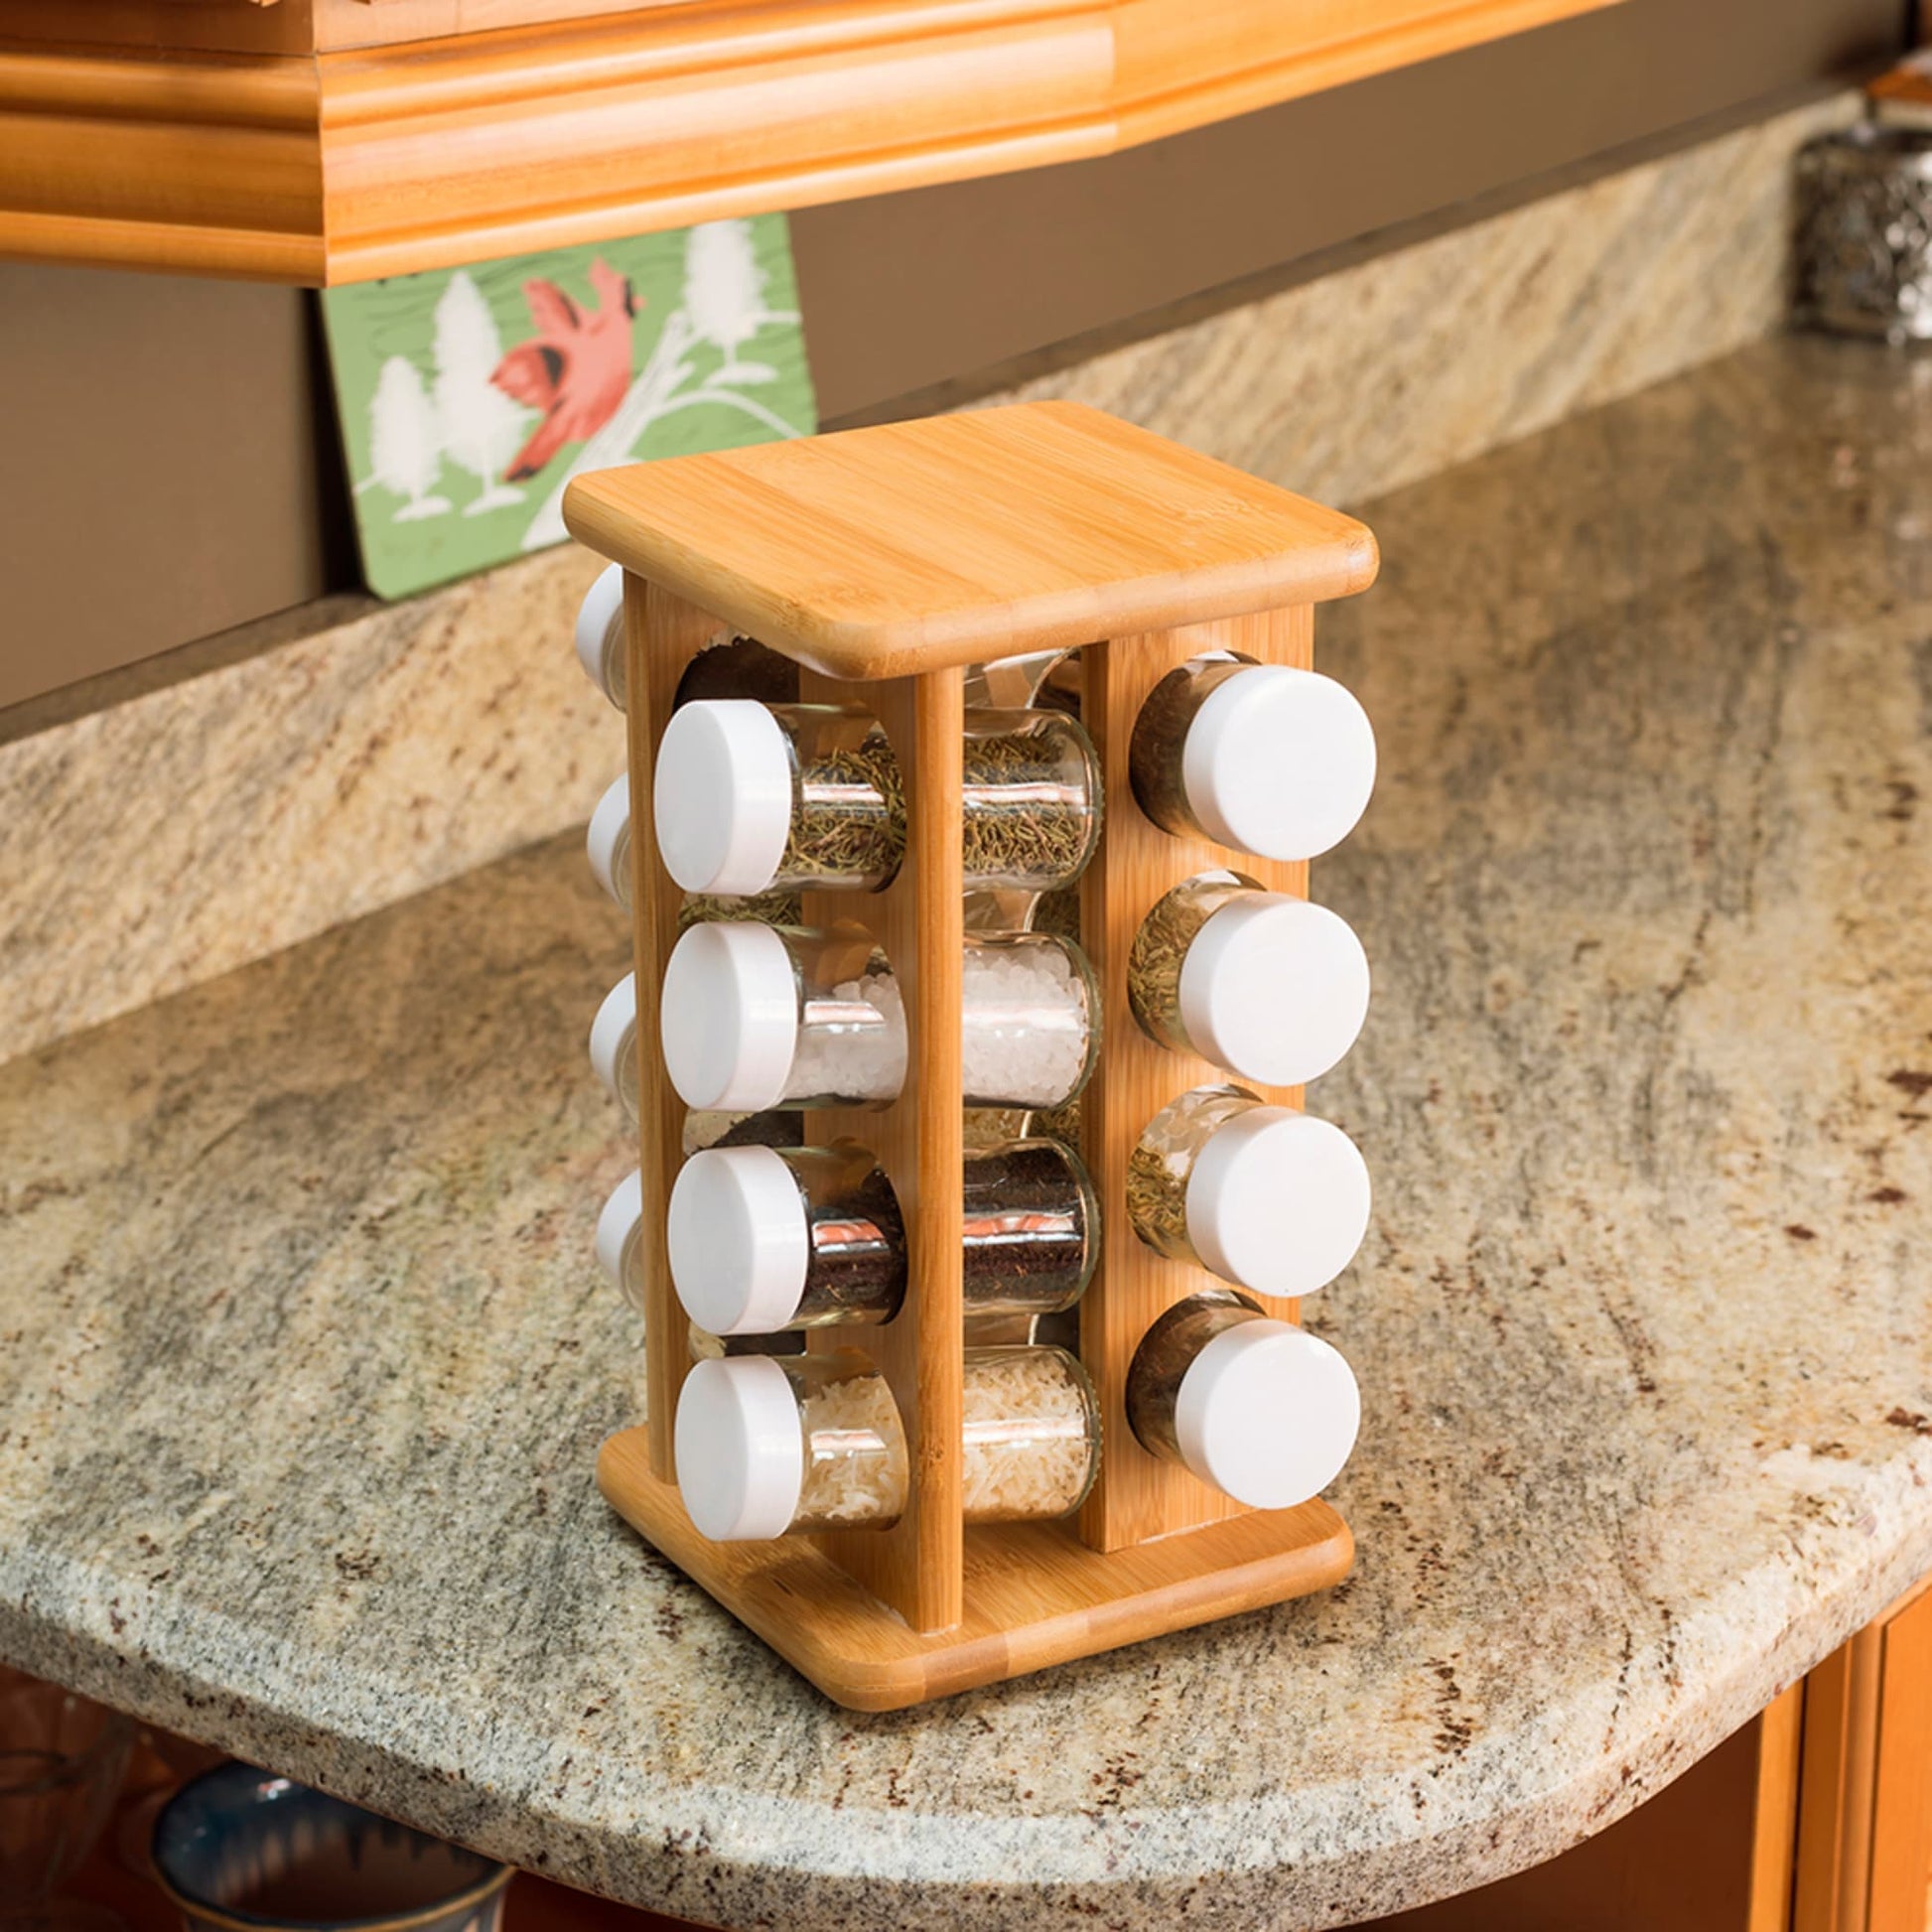 Free-Standing Bamboo Spice Rack